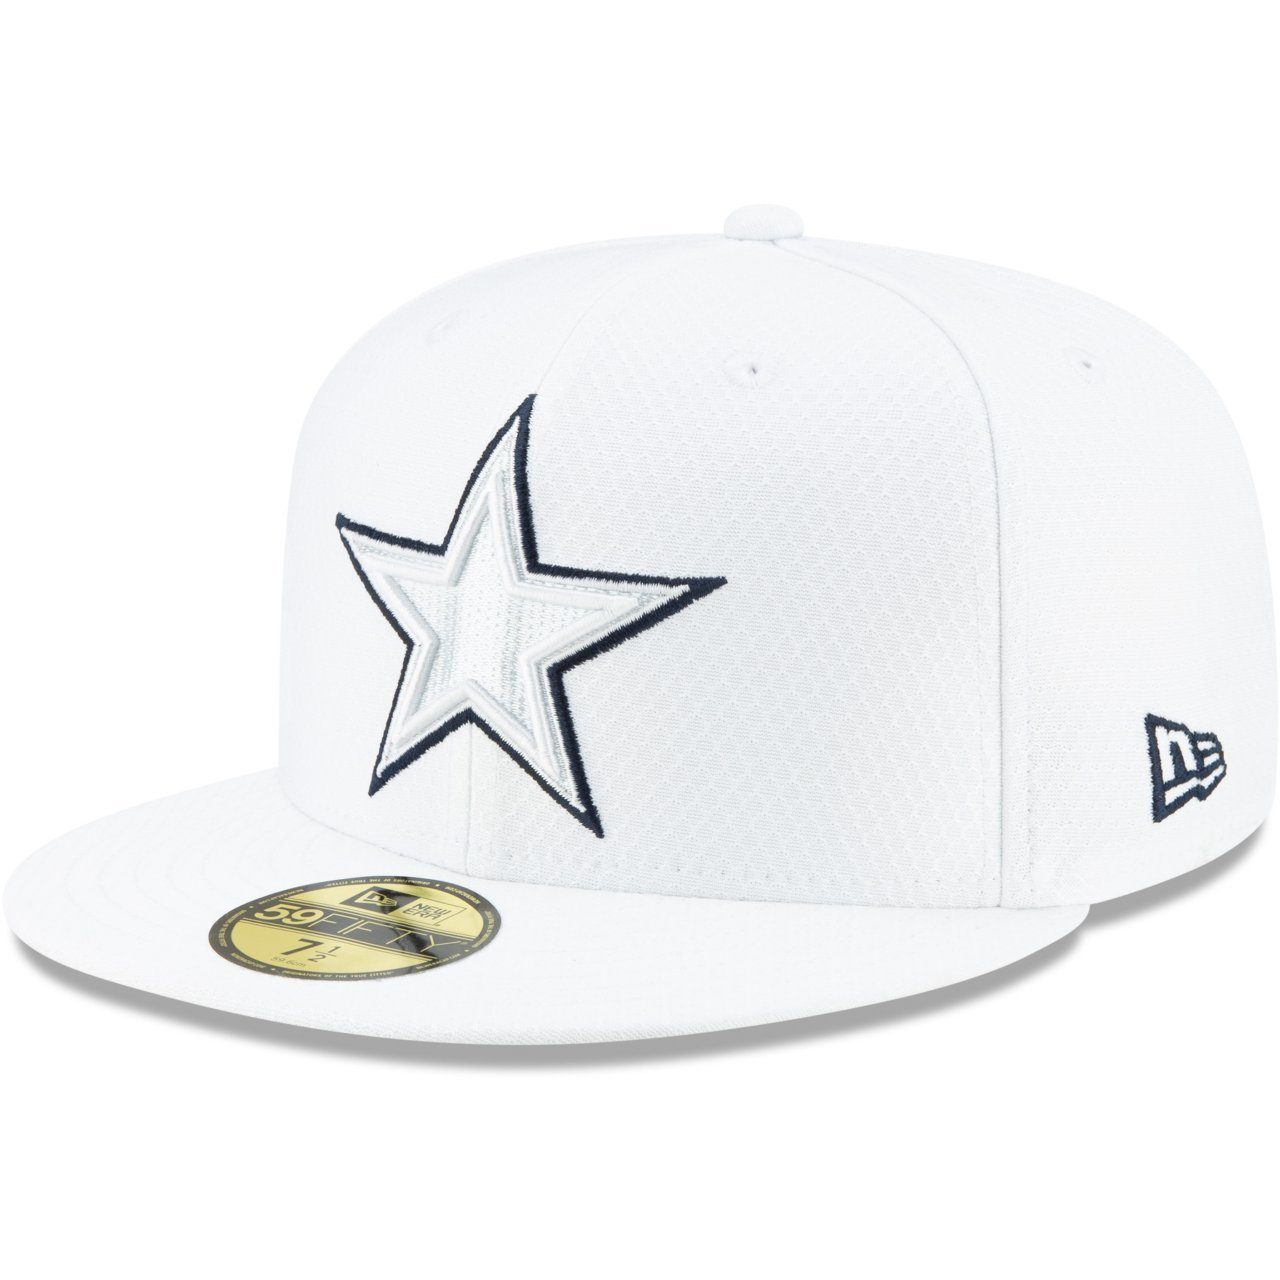 New Era Cap Cowboys PLATINUM 59Fifty Fitted NFL Sideline Dallas